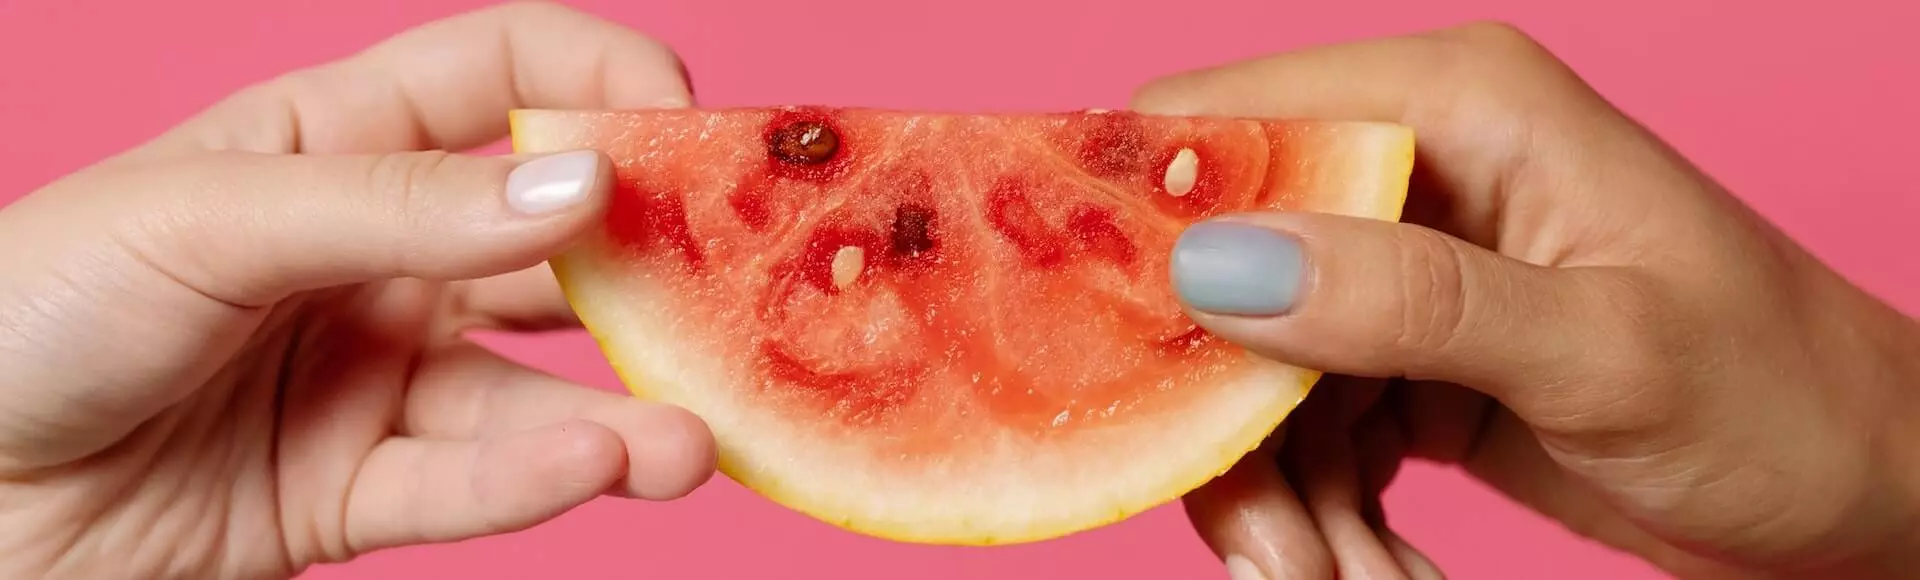 hands holding a piece of watermelon main-post-image